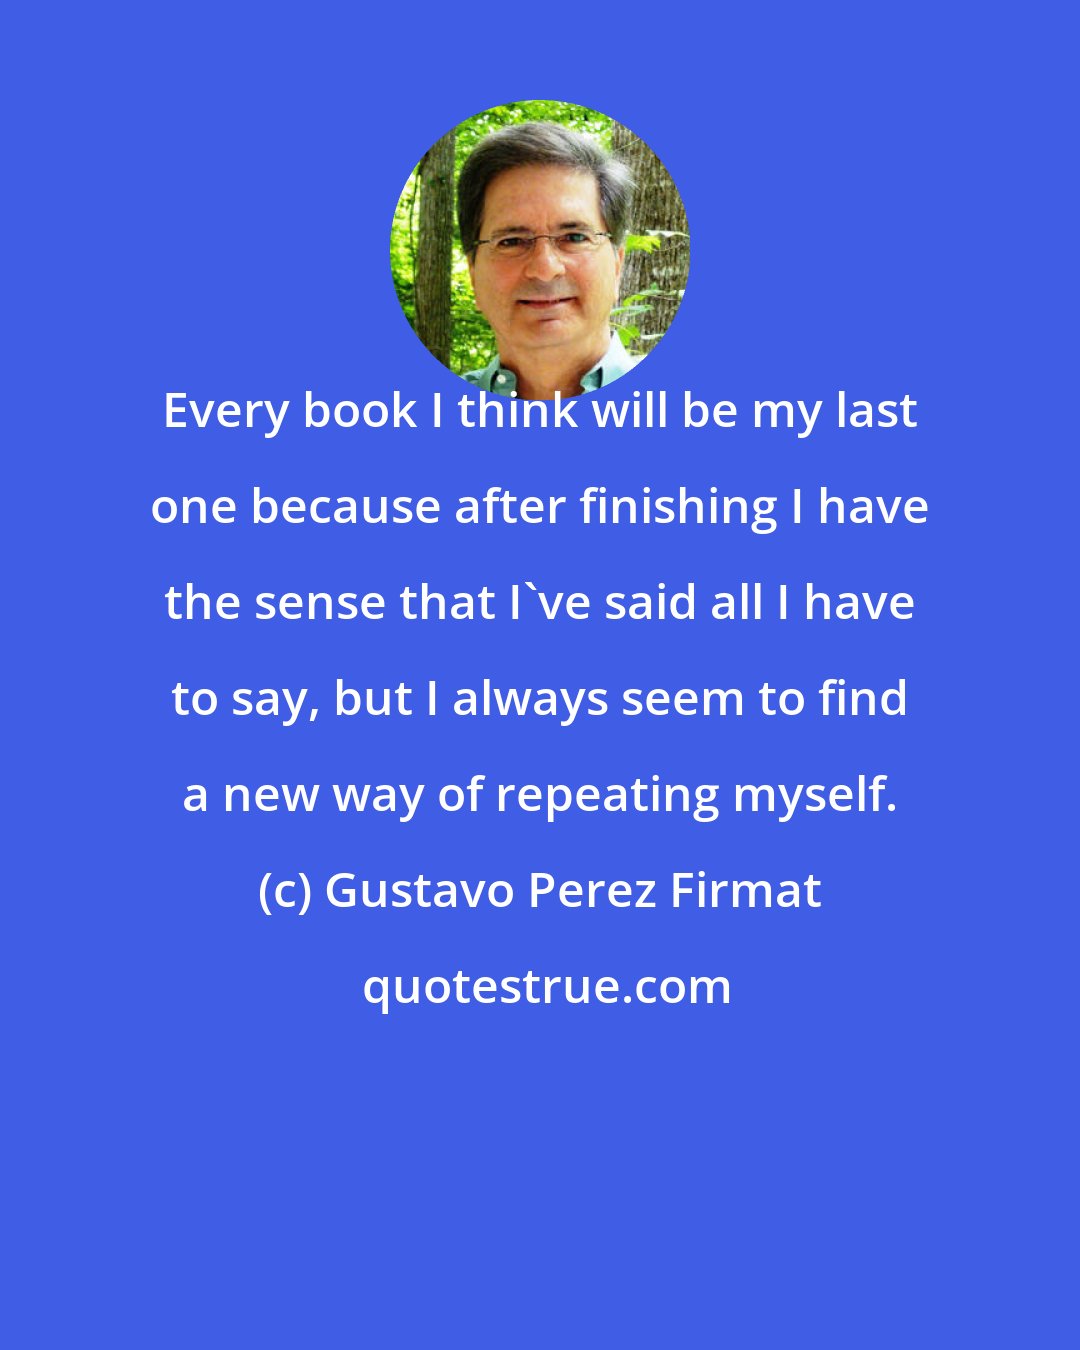 Gustavo Perez Firmat: Every book I think will be my last one because after finishing I have the sense that I've said all I have to say, but I always seem to find a new way of repeating myself.